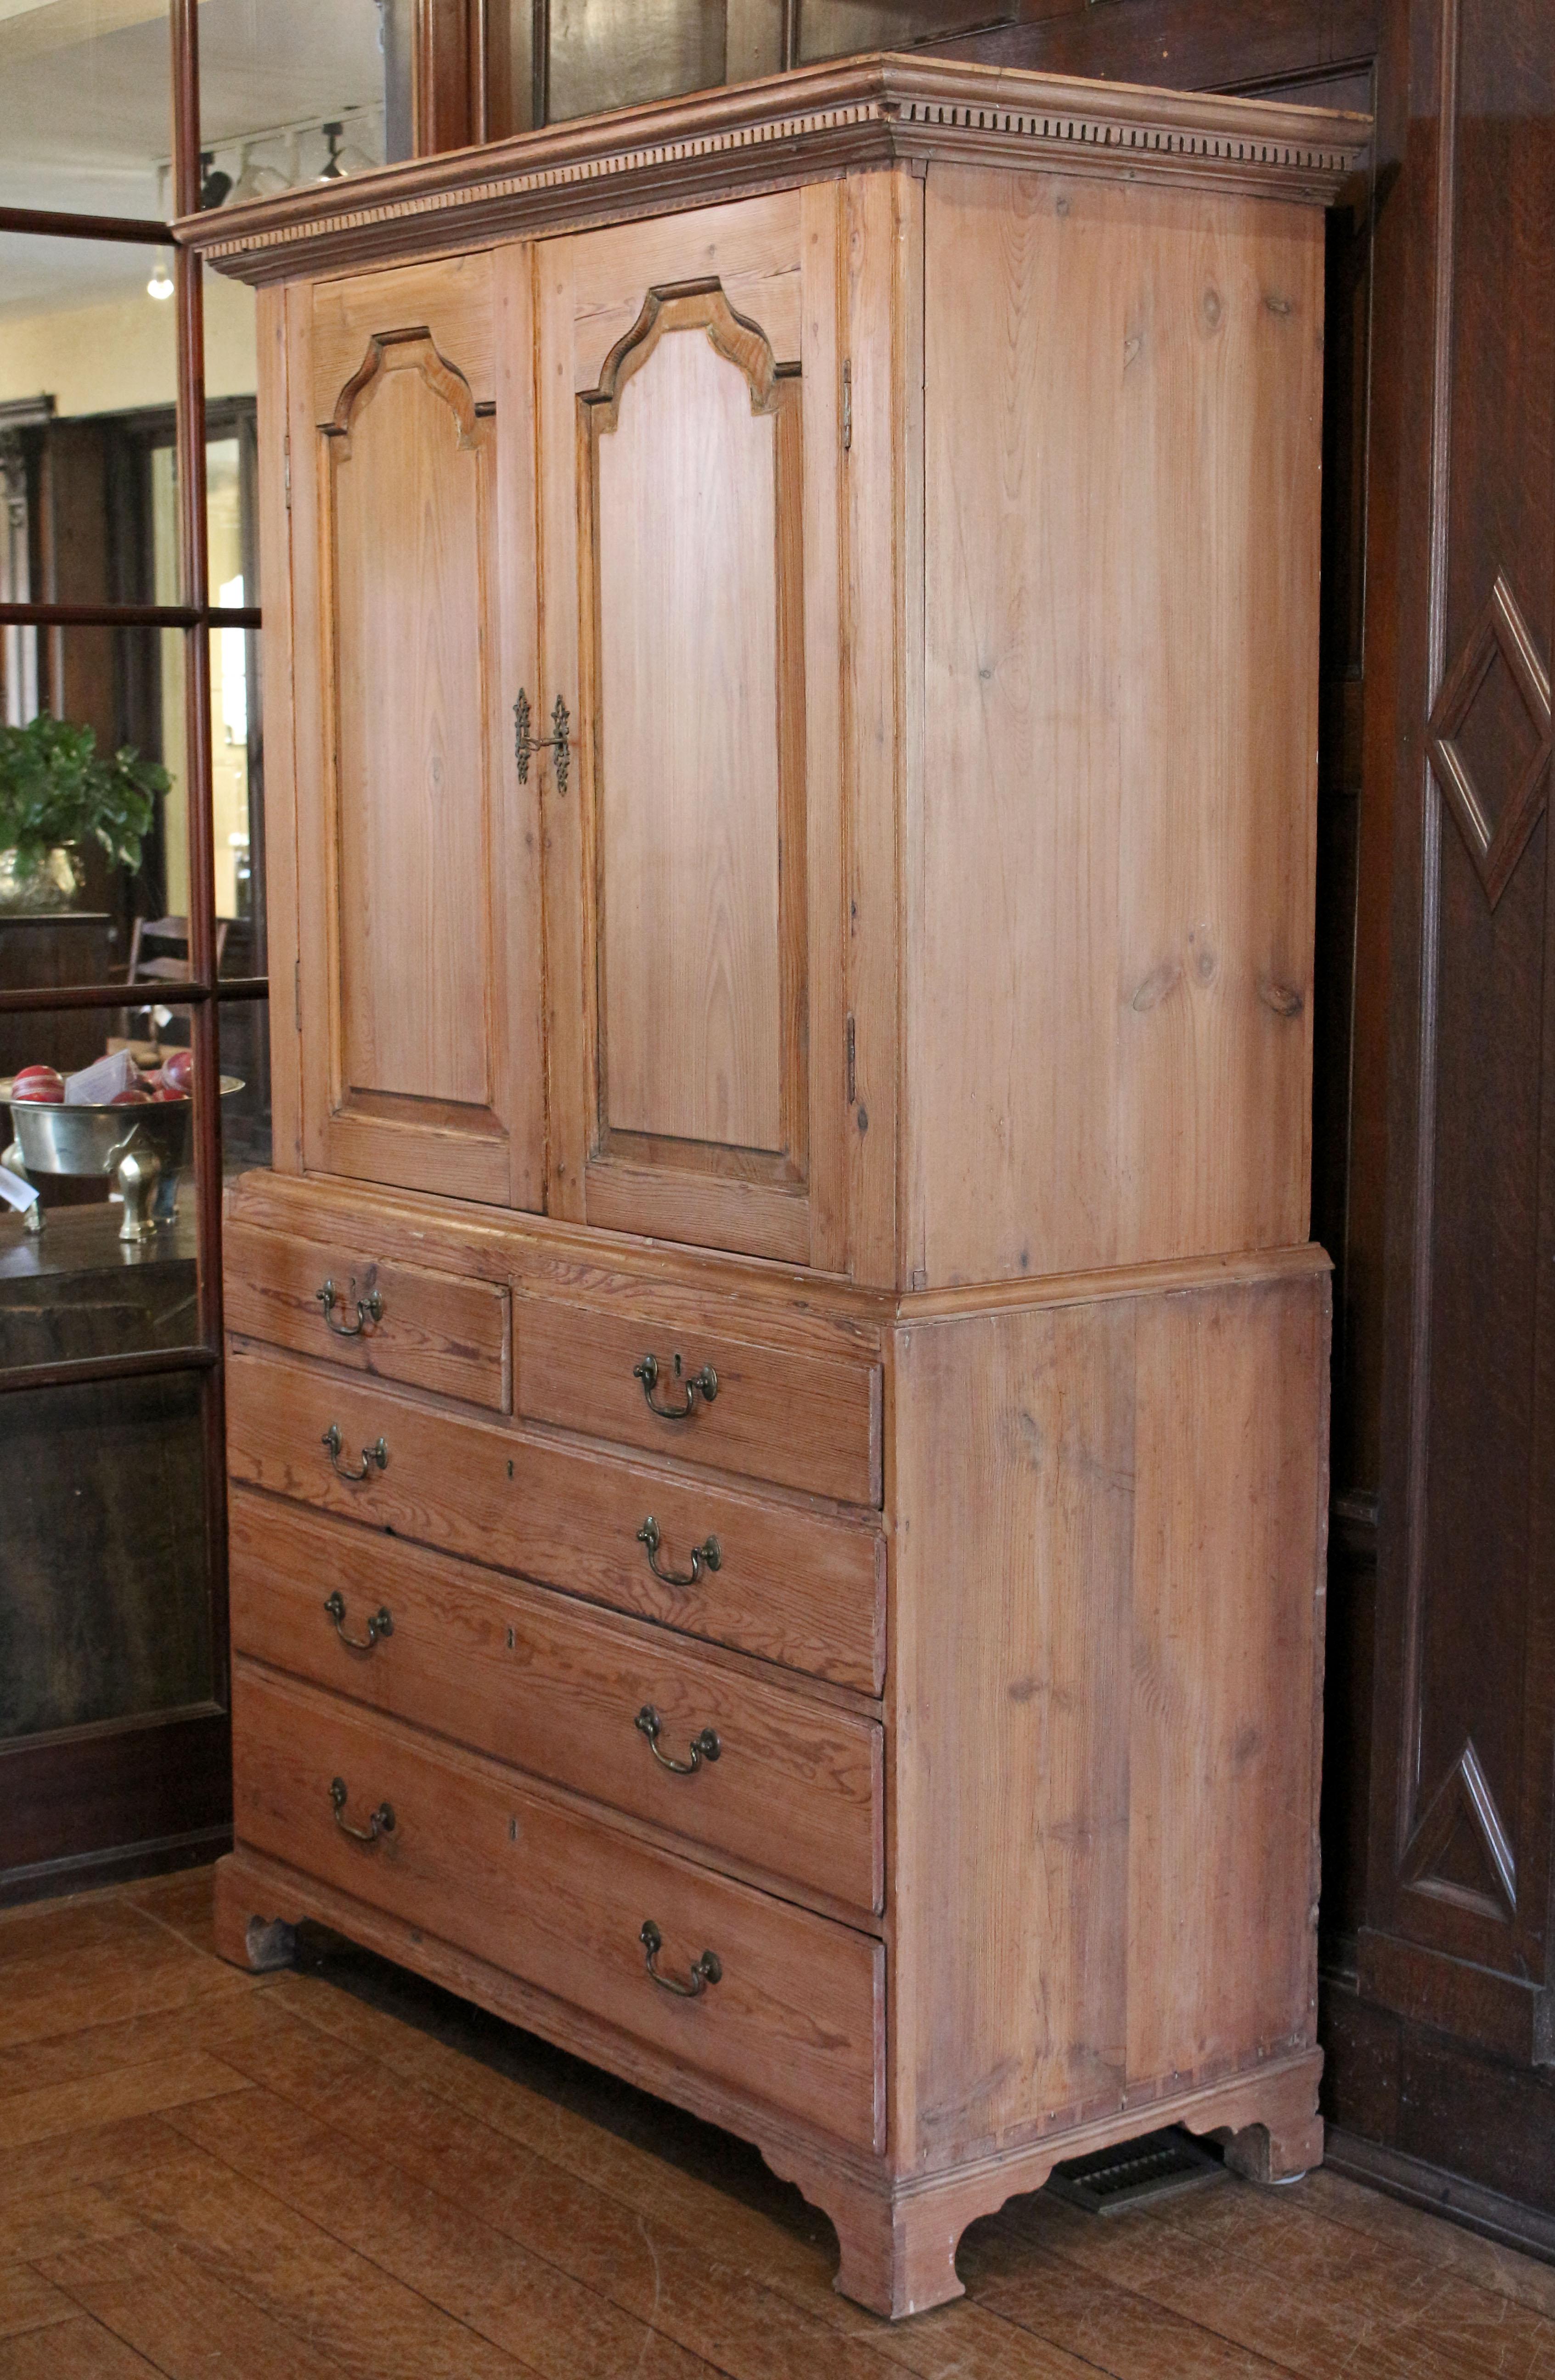 Circa 1765-80 George III period linen press, English. Stripped Scotts pine with tombstone panelled doors, dentil molding on the integral crown, bail & rosette pulls, and raised on original bracket feet. Interior with 2 stationary shelves. Doors with